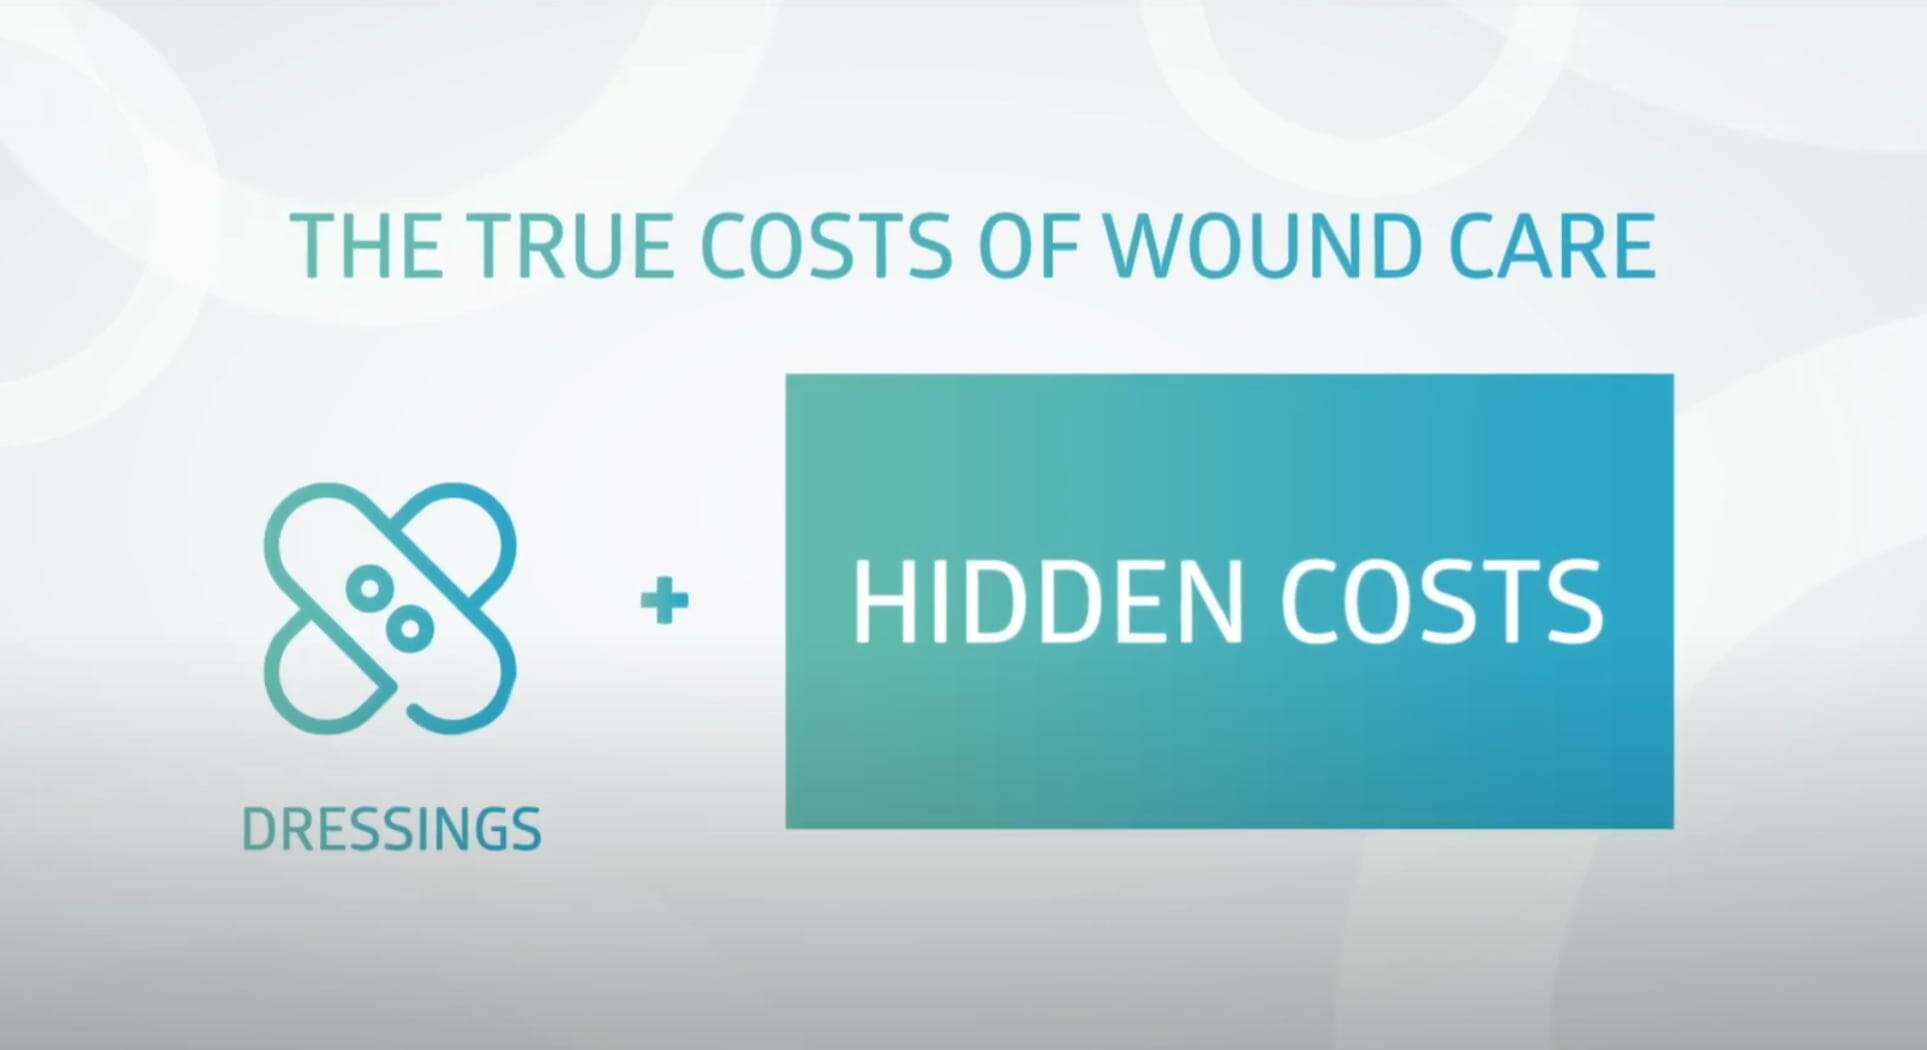 The true--and hidden--costs of wound care